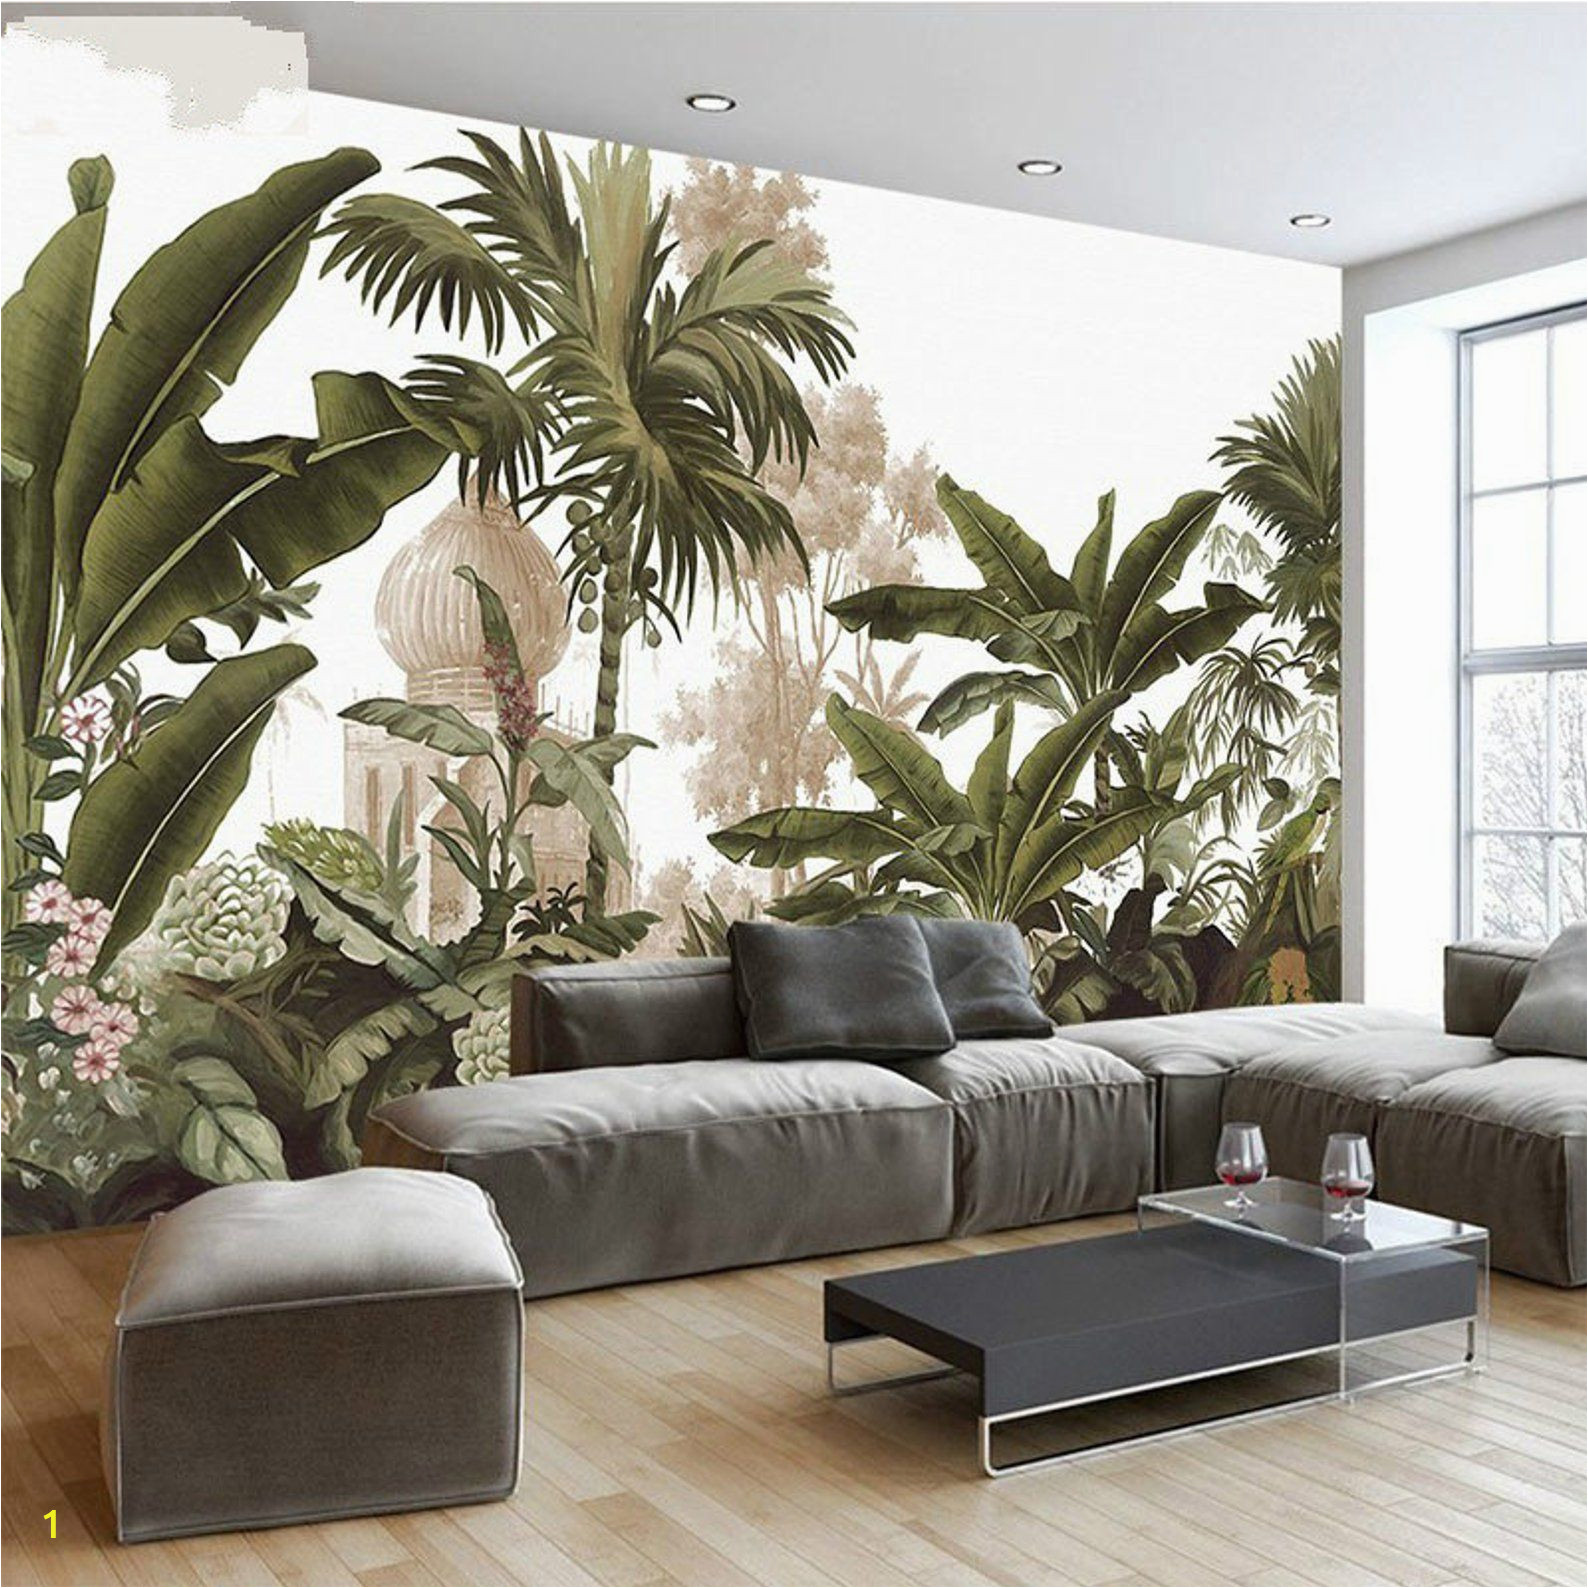 Forest Wall Mural Painting Hand Painted Tropical Rainforest forest Wallpaper Wall Mural